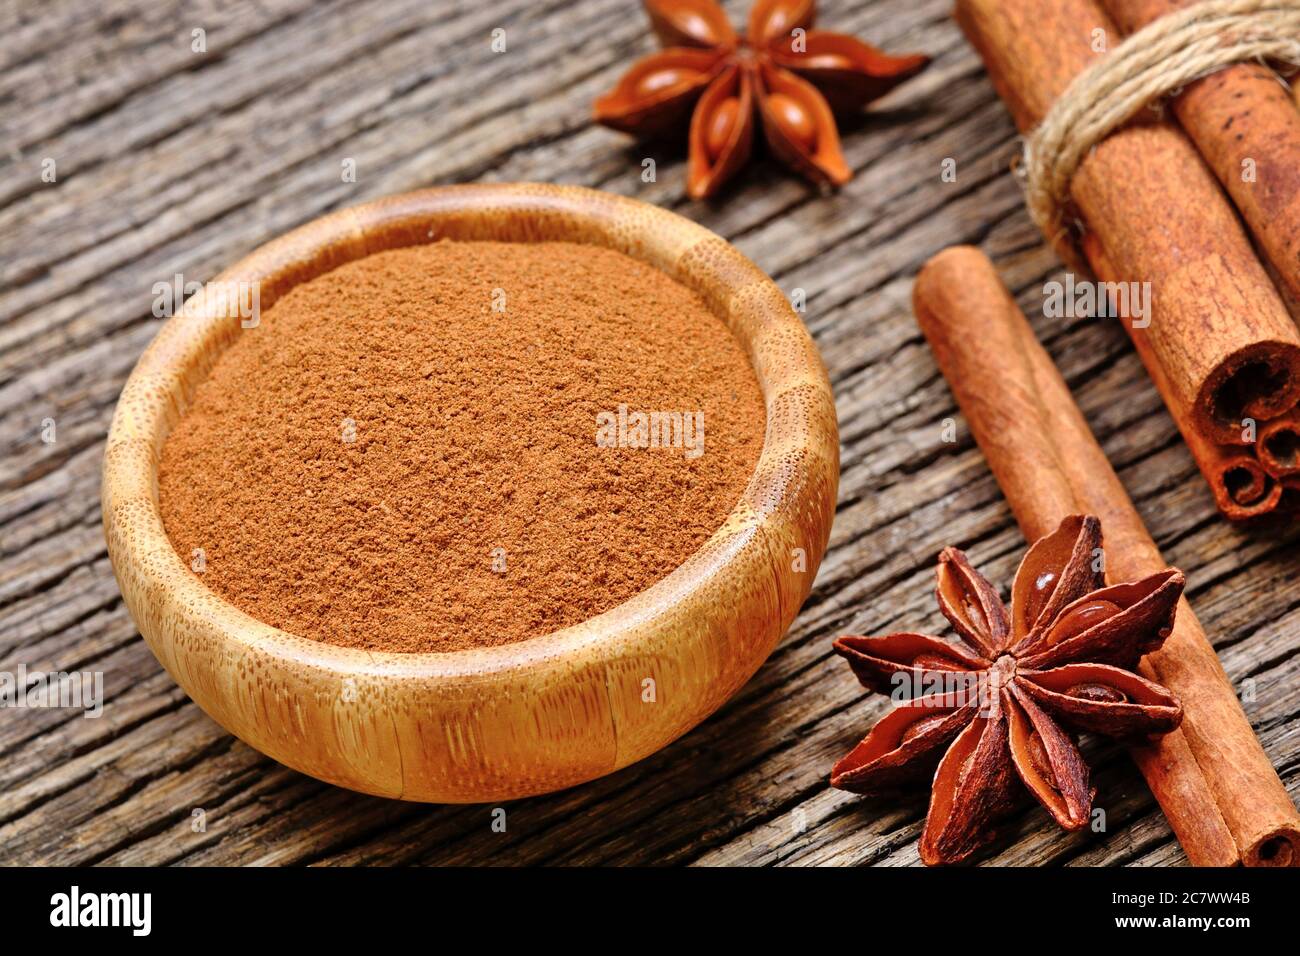 Cinnamon powder in a bamboo bowl with star anise and cinnamon sticks on a wood table Stock Photo